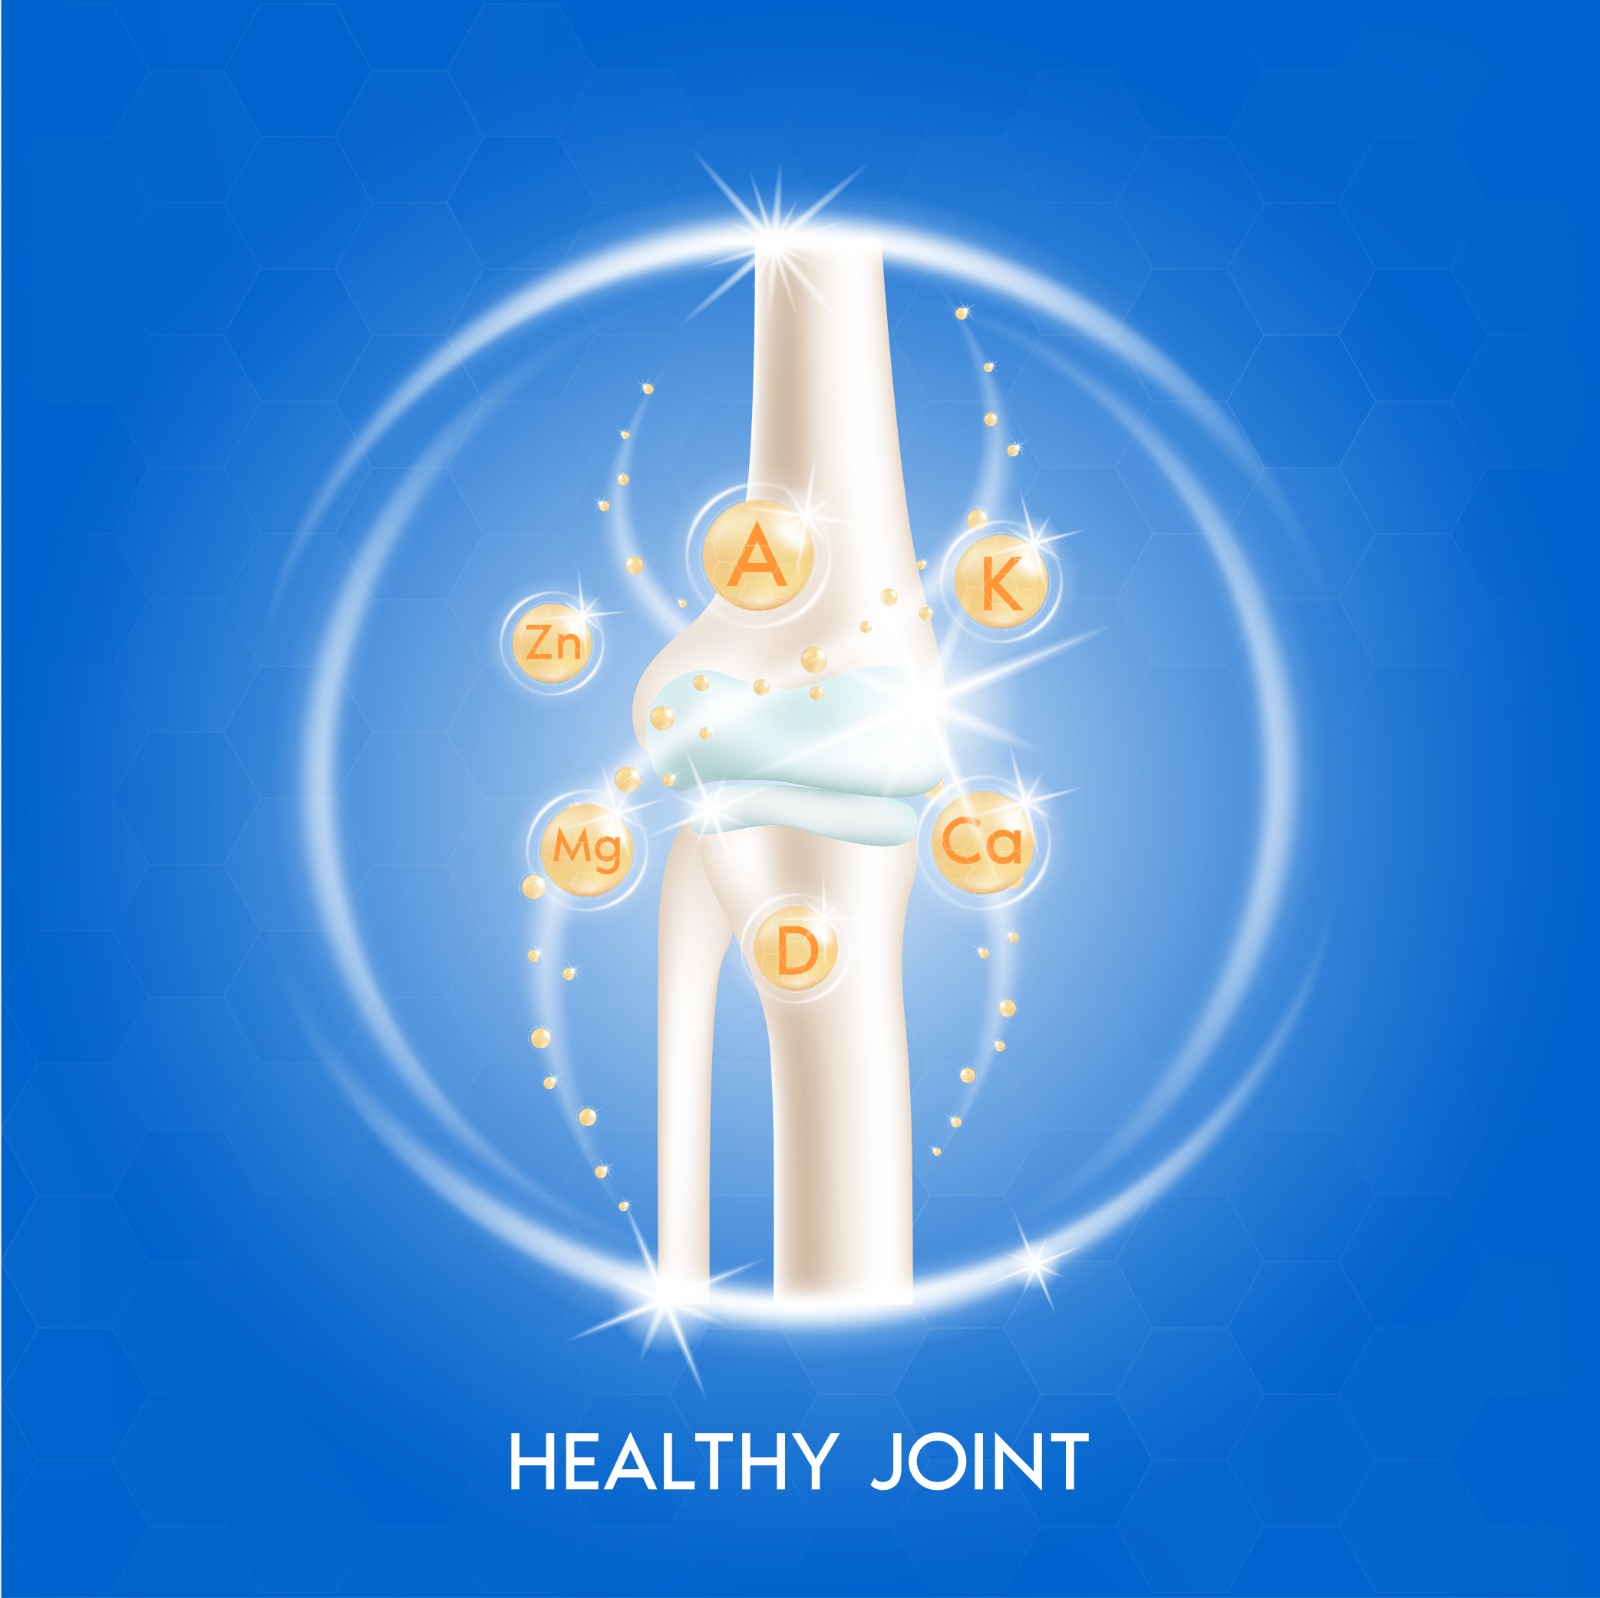 Does Swarna Bhasma help relieve joint pain?